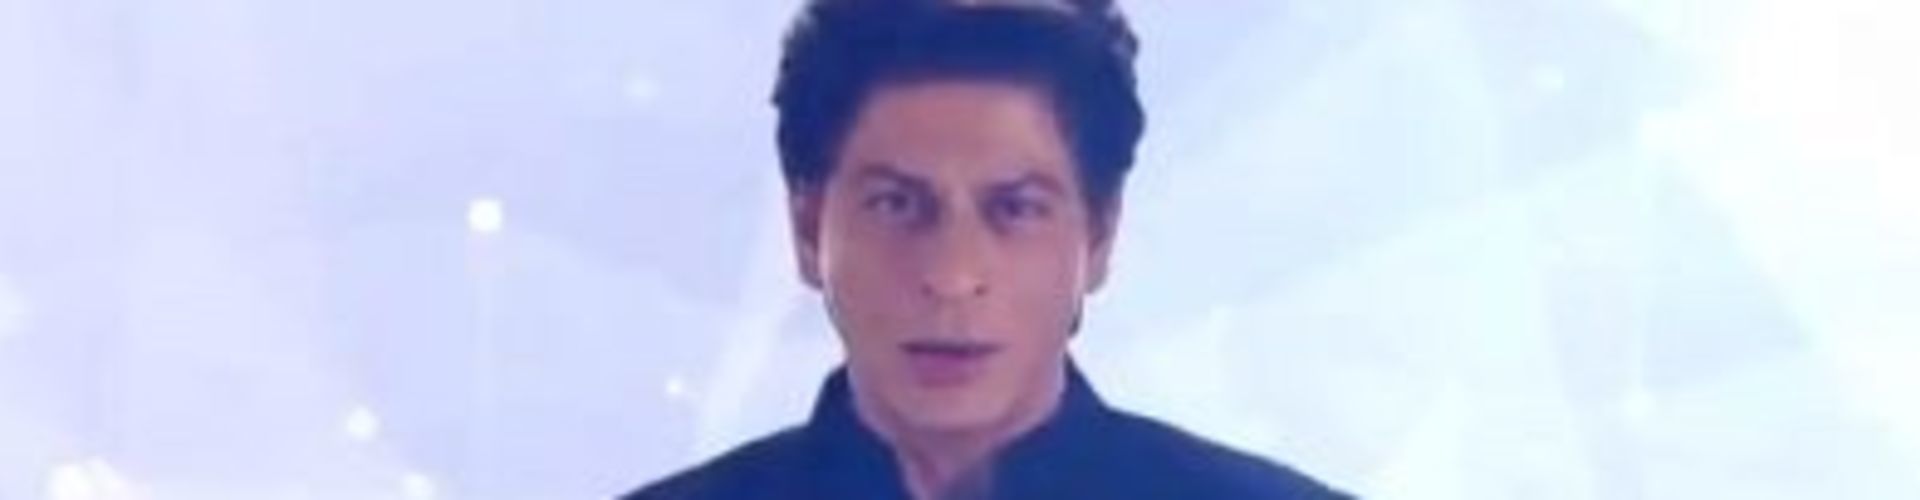 Shahrukh Khan Join Hands with Clean Indian Campaign on Gandhi Jayanti